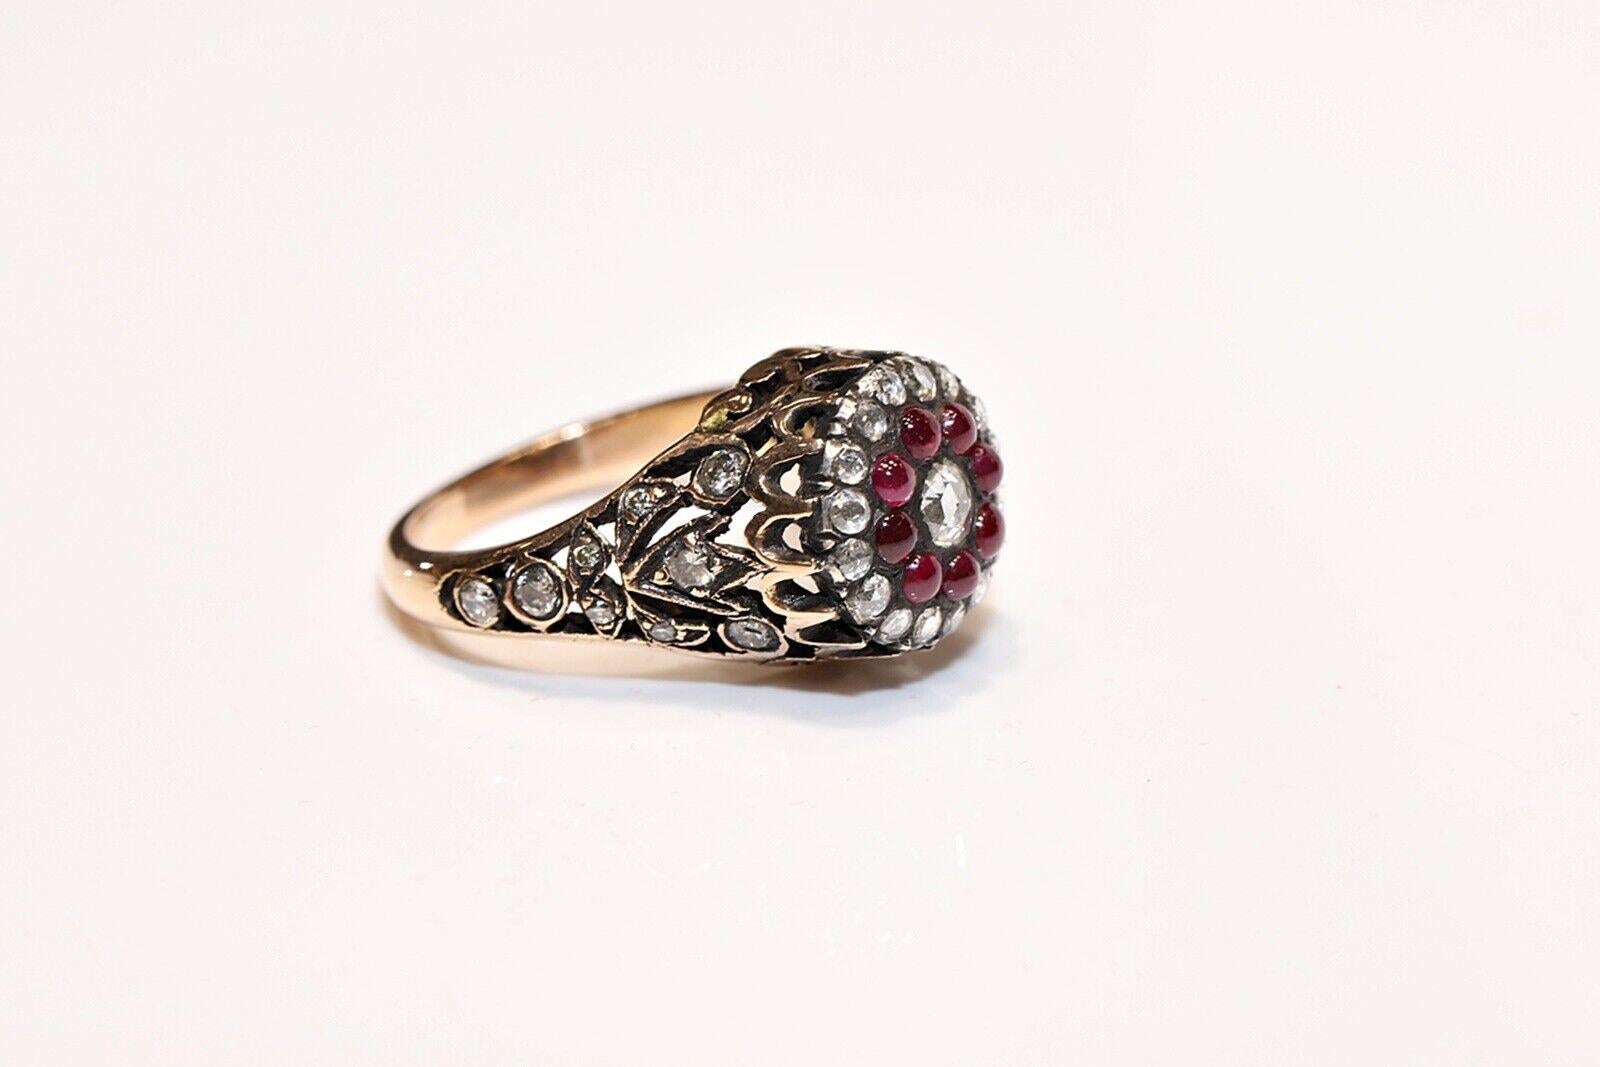 Retro Vintage Circa 1970s 14k Gold Natural Diamond And Cabochon Ruby Decorated Ring  For Sale